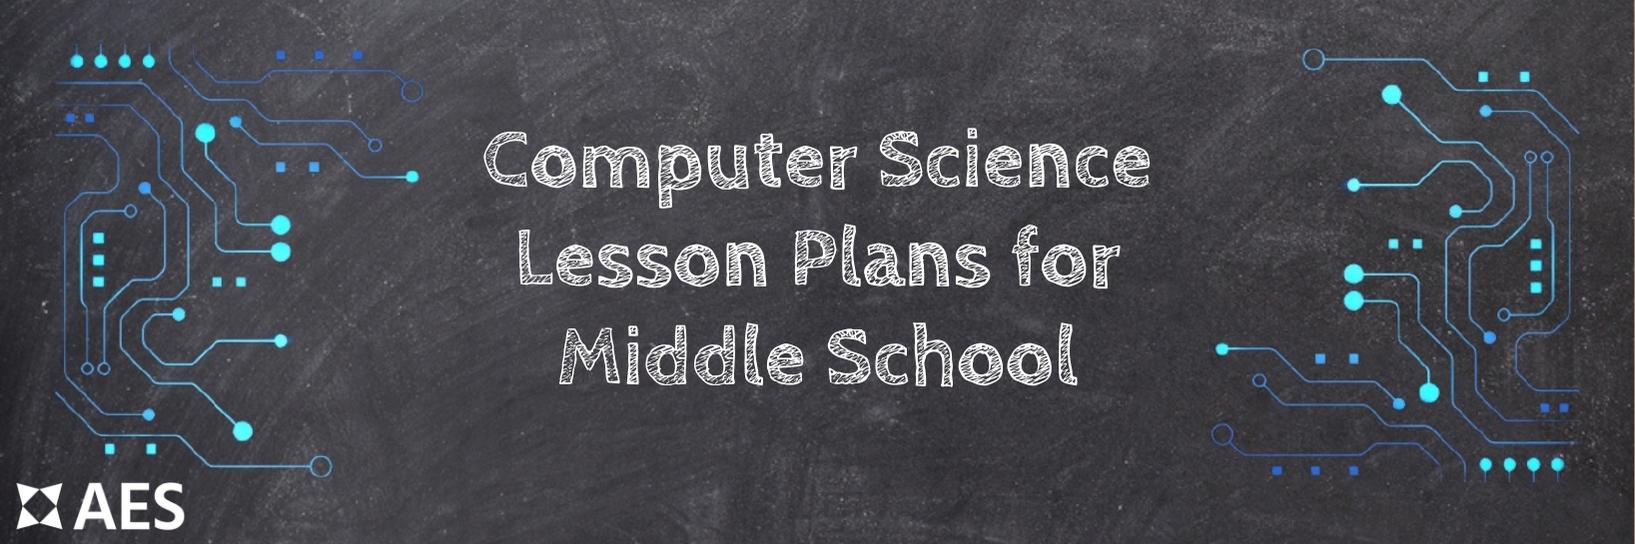 Computer Science Lesson Plans: 5 Best Options for Middle School